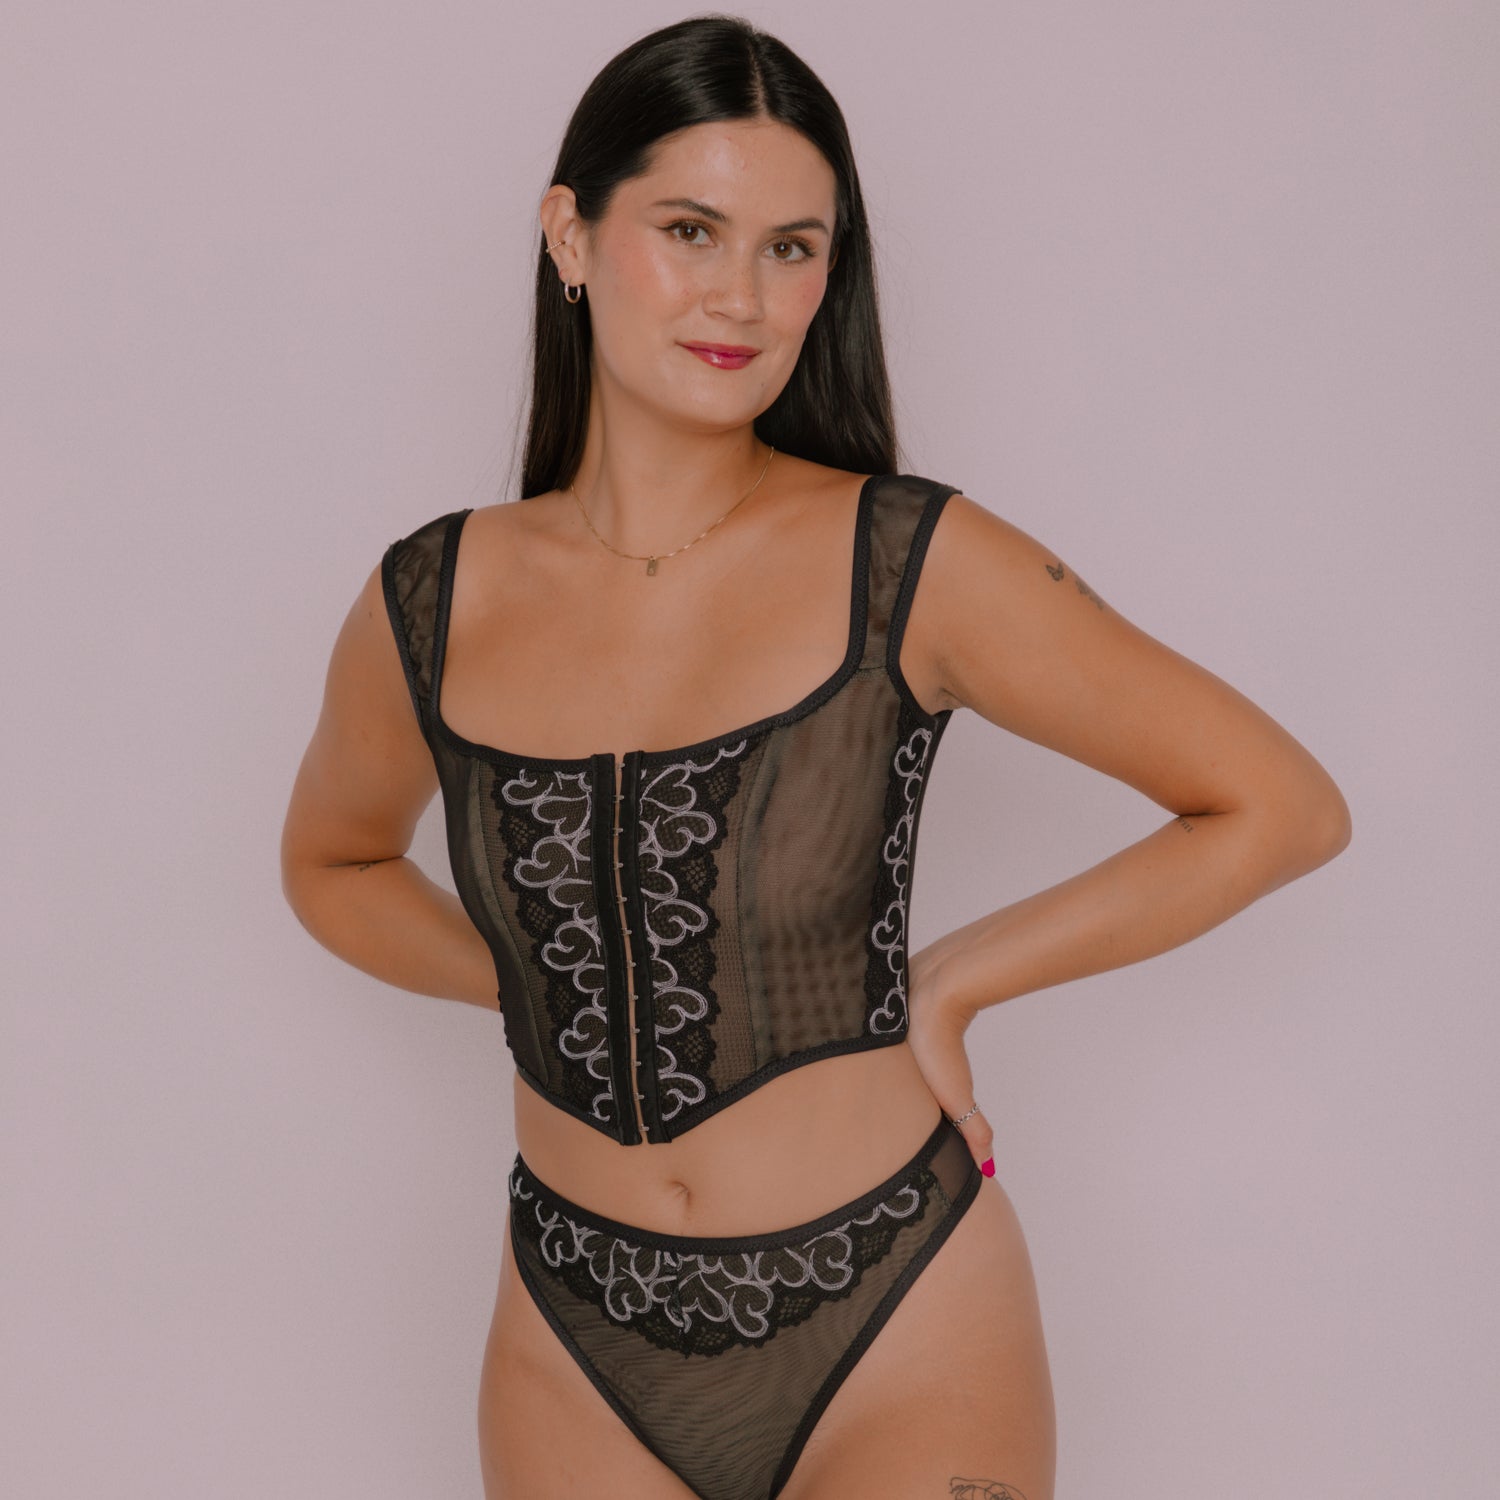 Woman wearing the Free Odessa Corset Top and Panty sewing pattern from Madalynne on The Fold Line. A corset top and panty pattern made in stretch mesh, stretch all over lace, jersey, and lycra fabrics, featuring fold over elastic, channelling, plastic bon